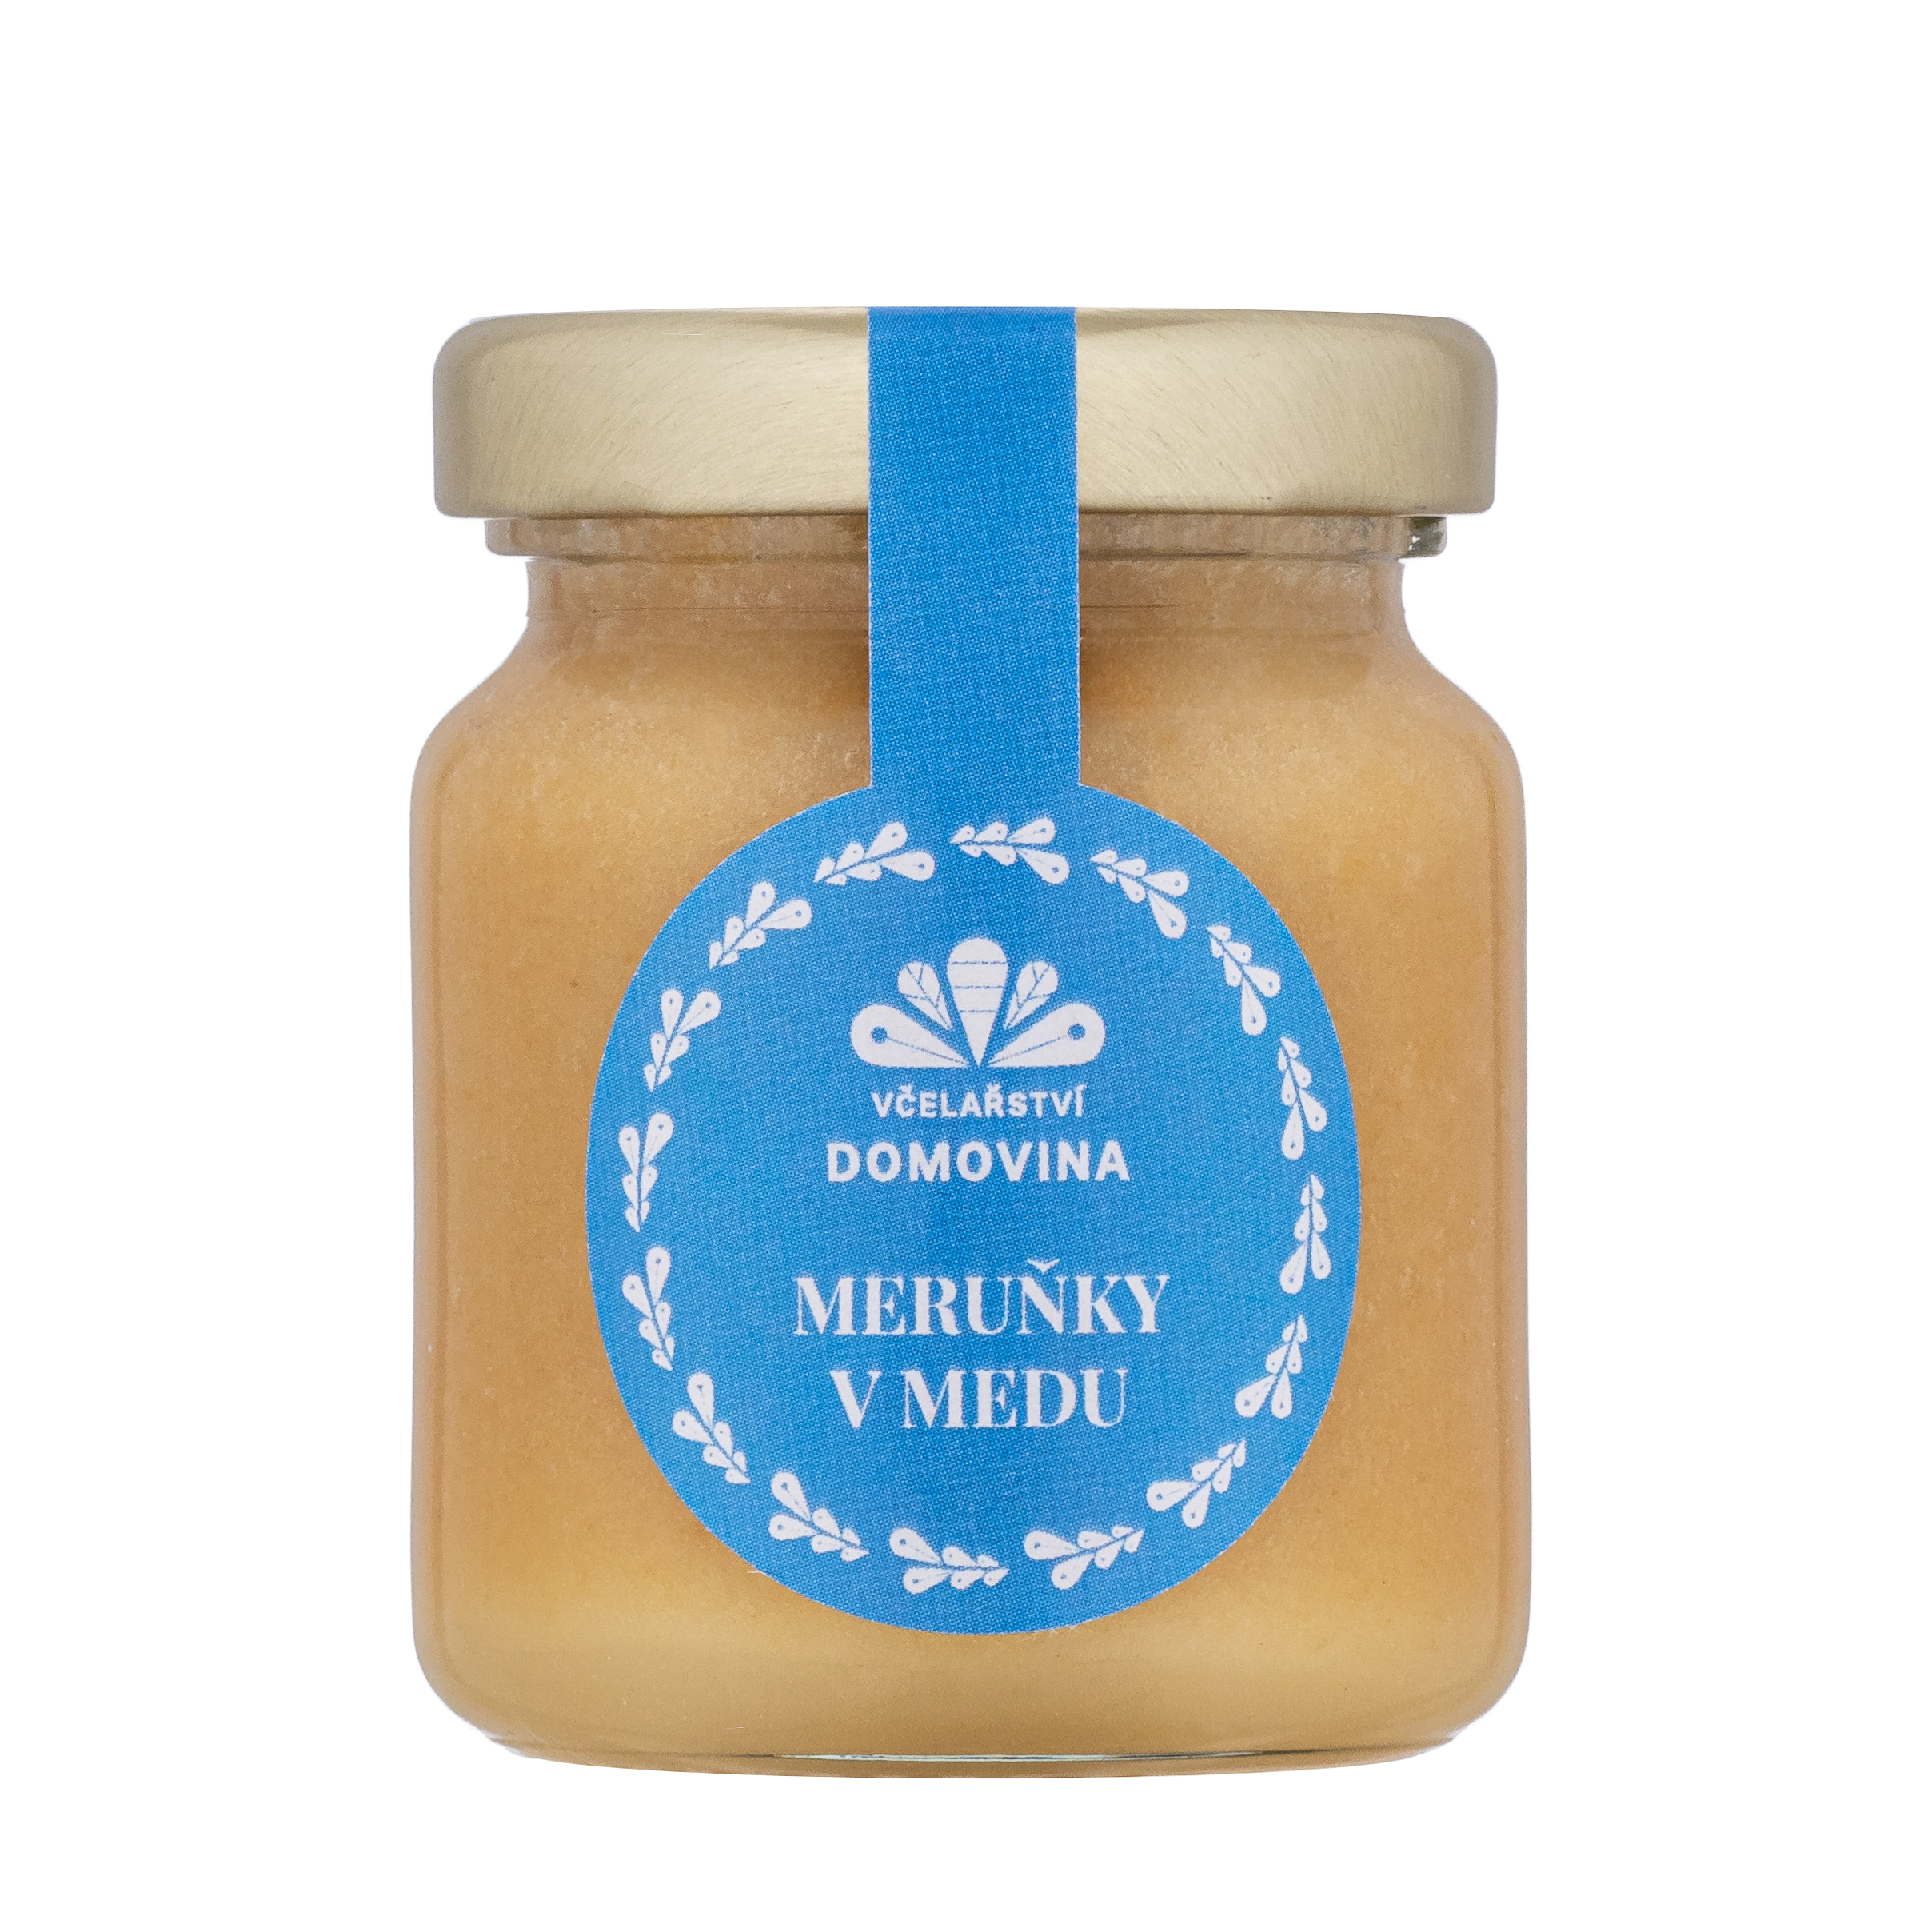 Apricots in honey, weight 75 g